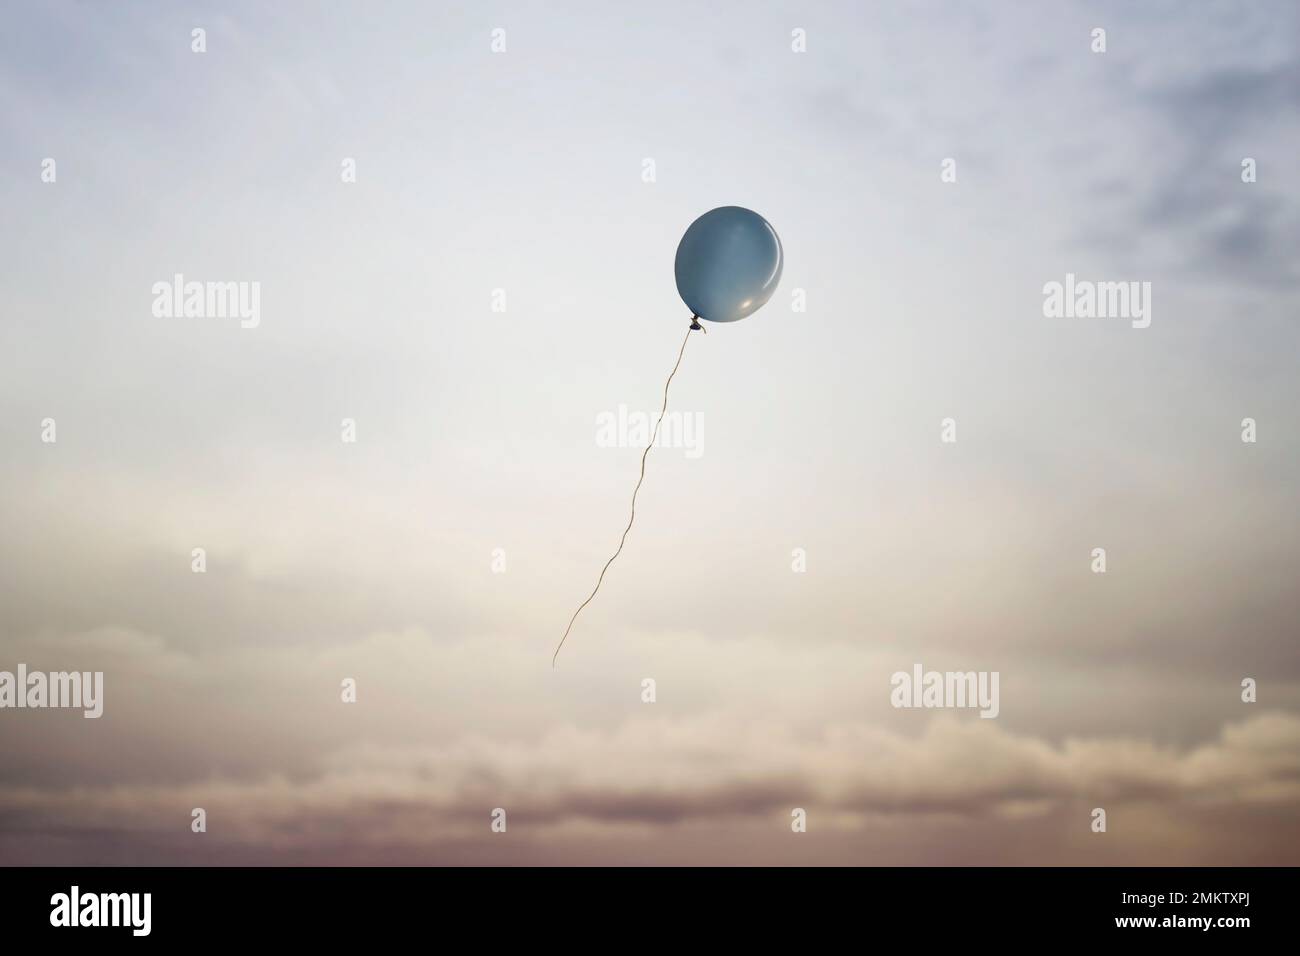 surreal travel of a balloon flying in the sky towards freedom, concept of lightness of the spirit of dreamers Stock Photo